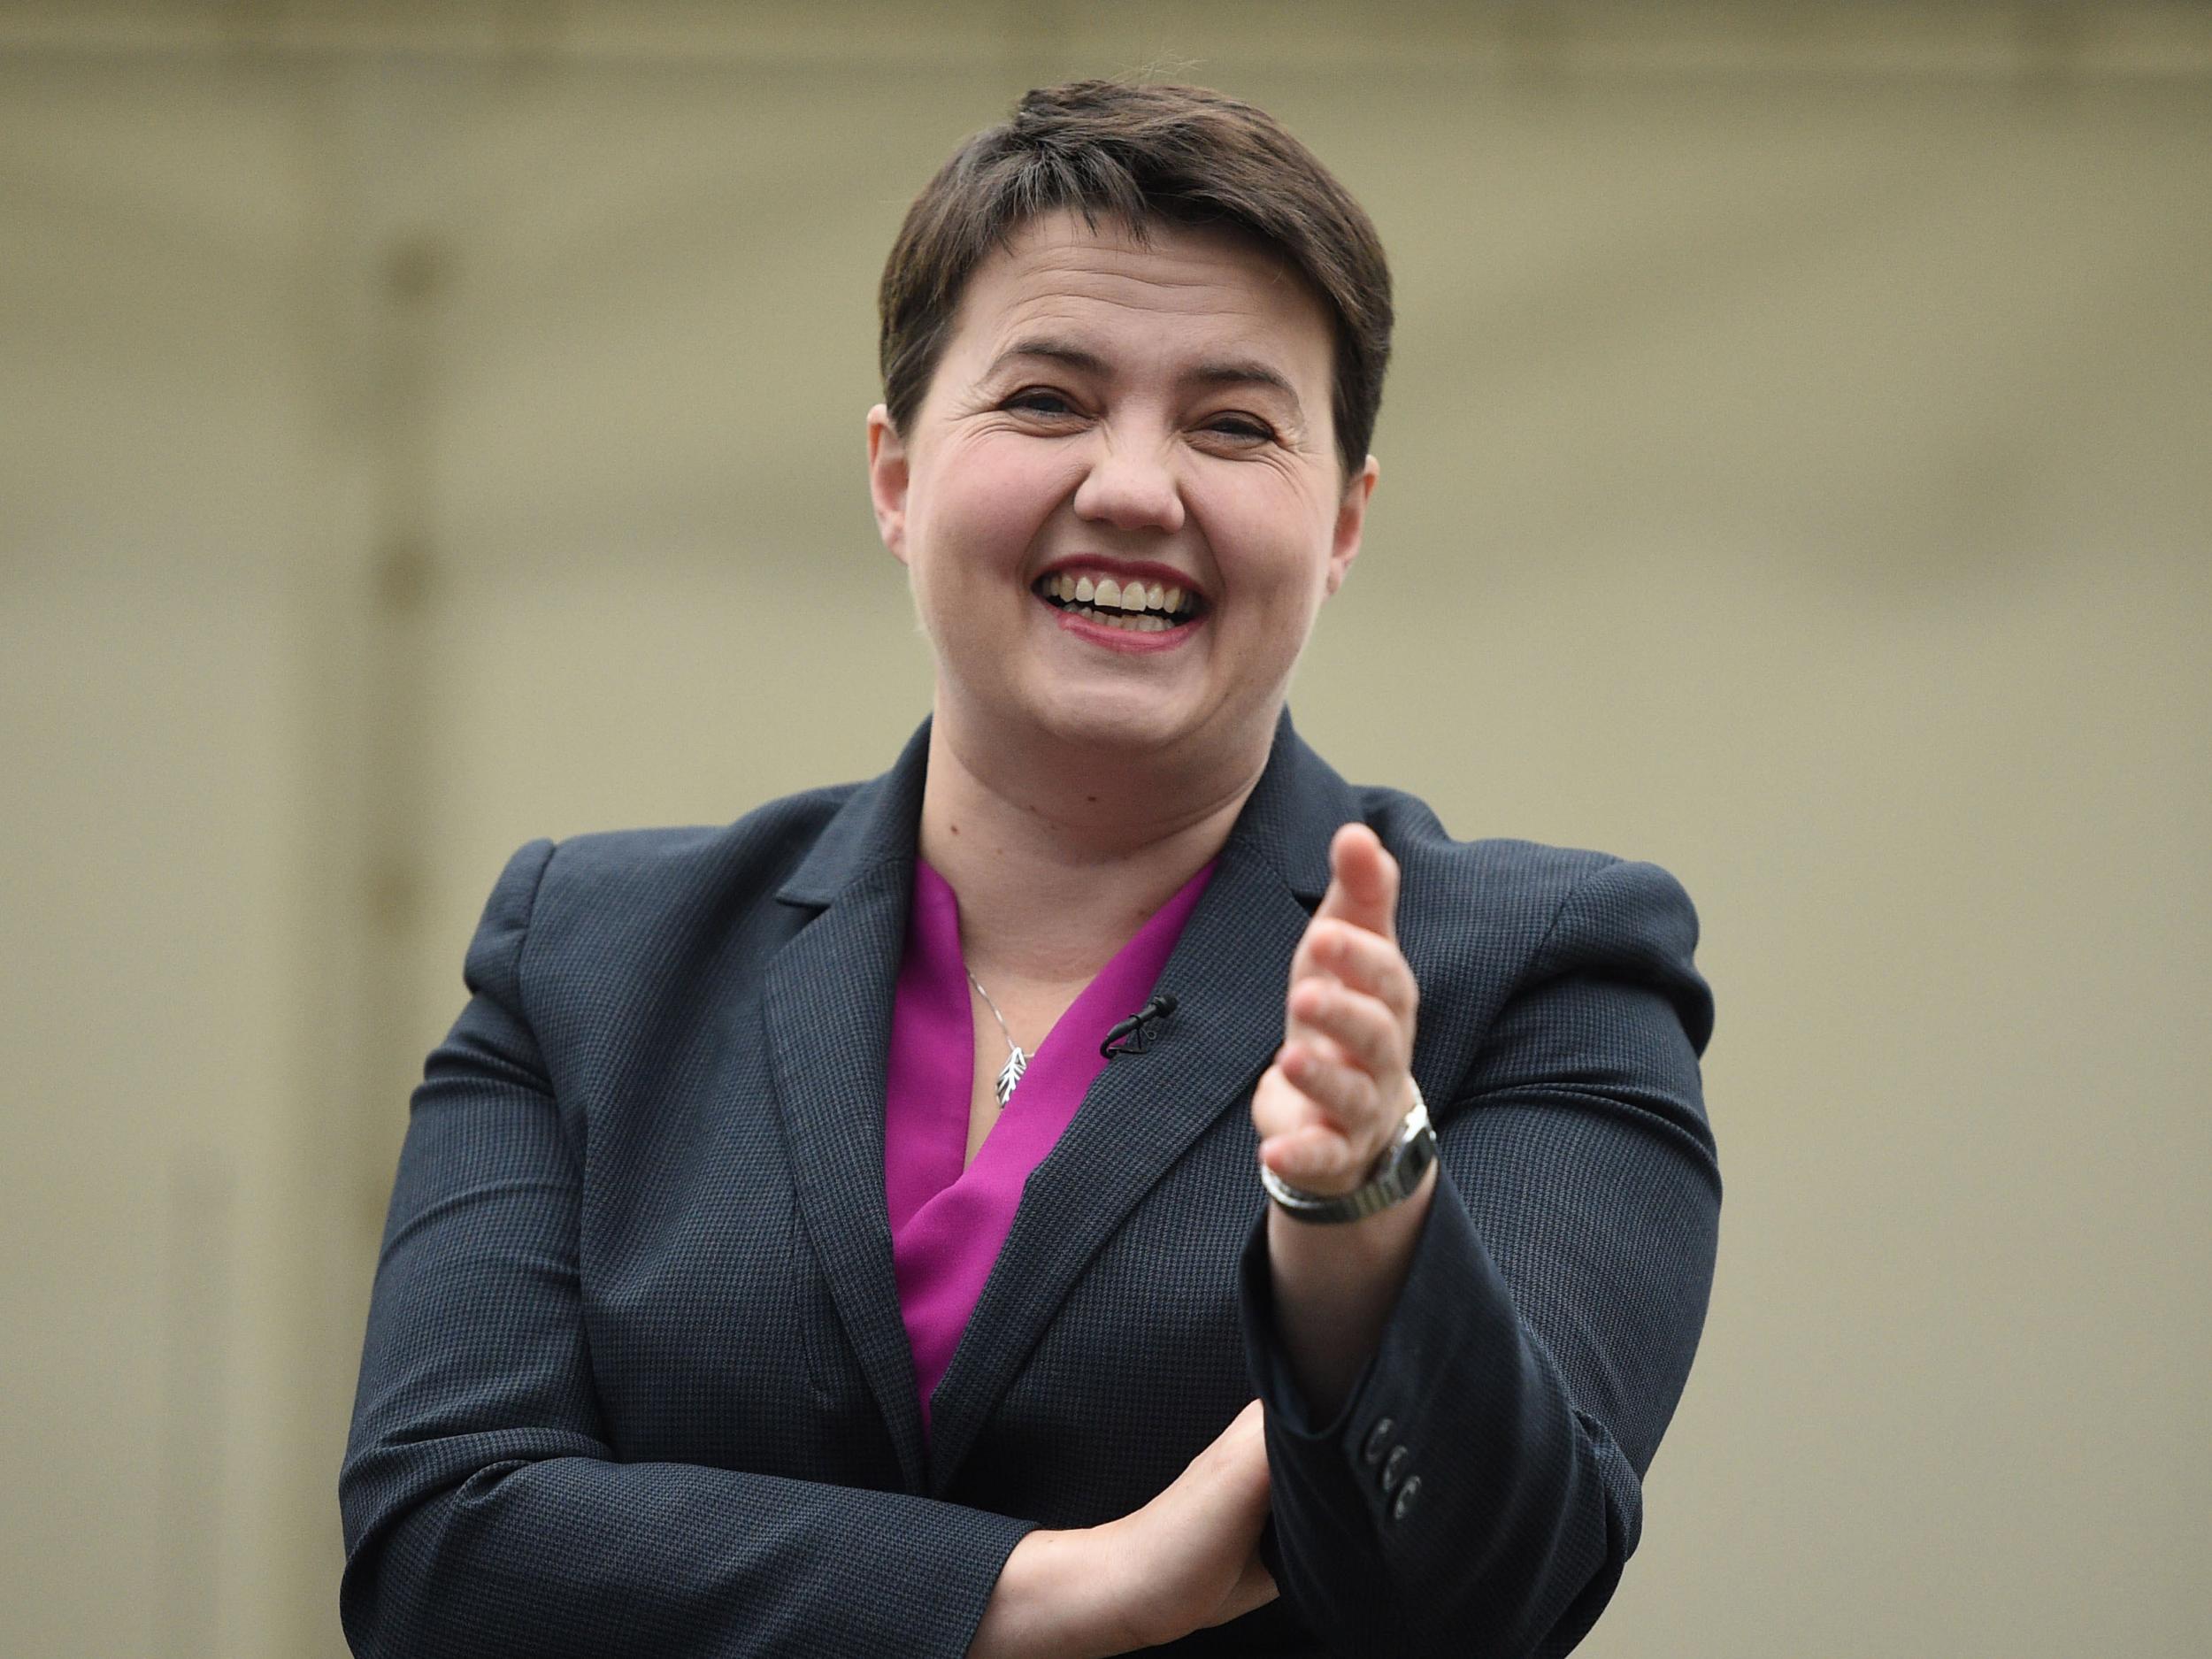 Ruth Davidson 'made clear' to Theresa May that a special deal for Northern Ireland was unacceptable